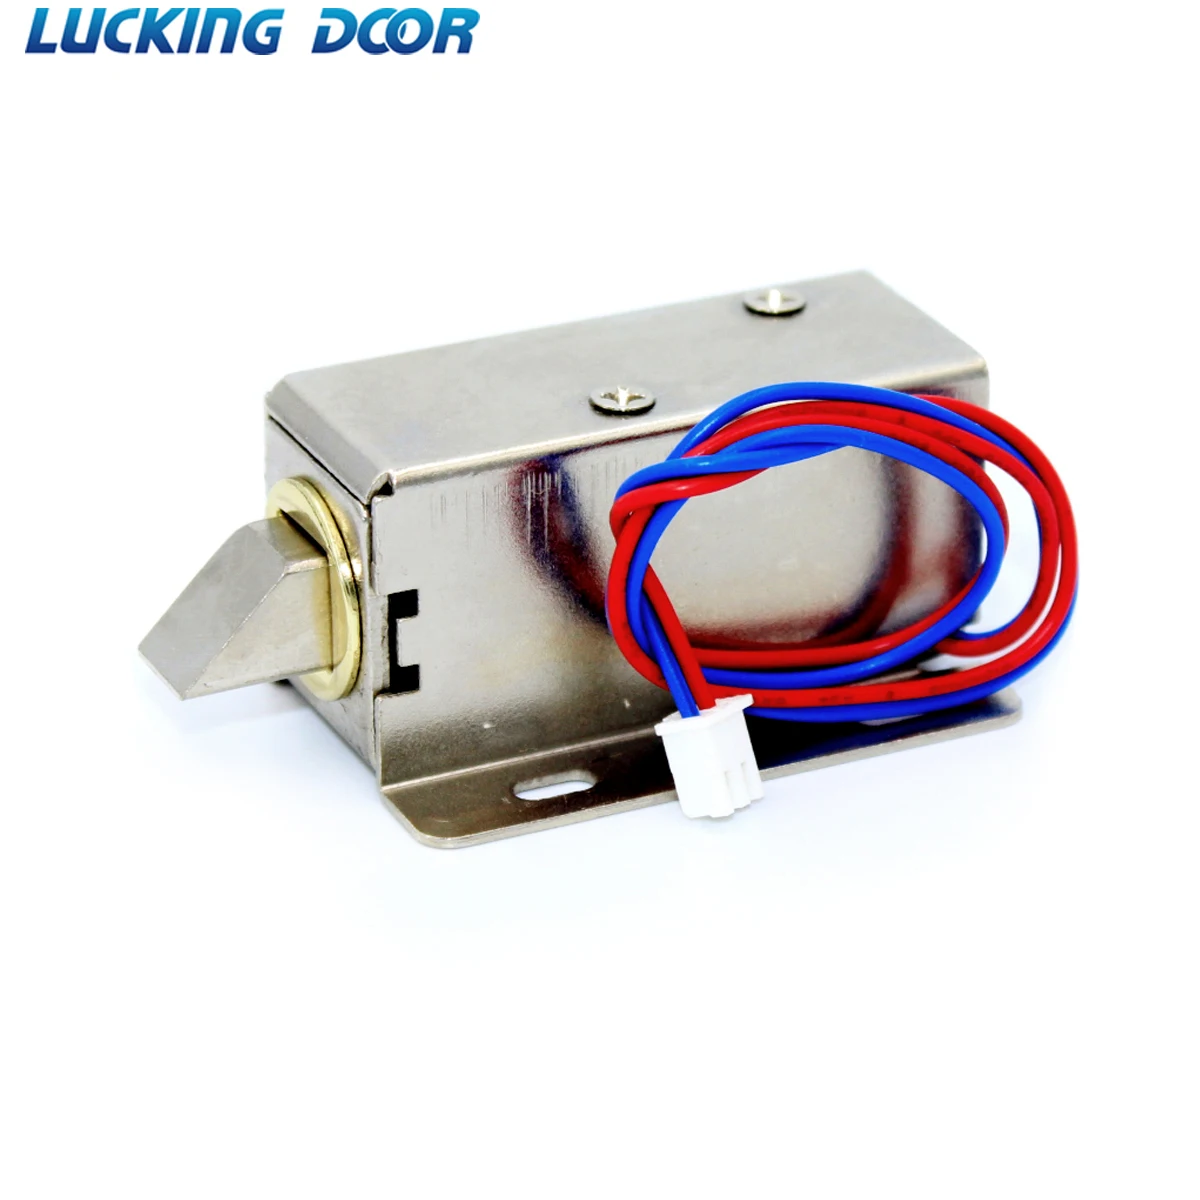 Nsee Sz-tfbc-g008917 12v 8w Open Frame Solenoid Electric Door Lock Gate Latch for sale online 